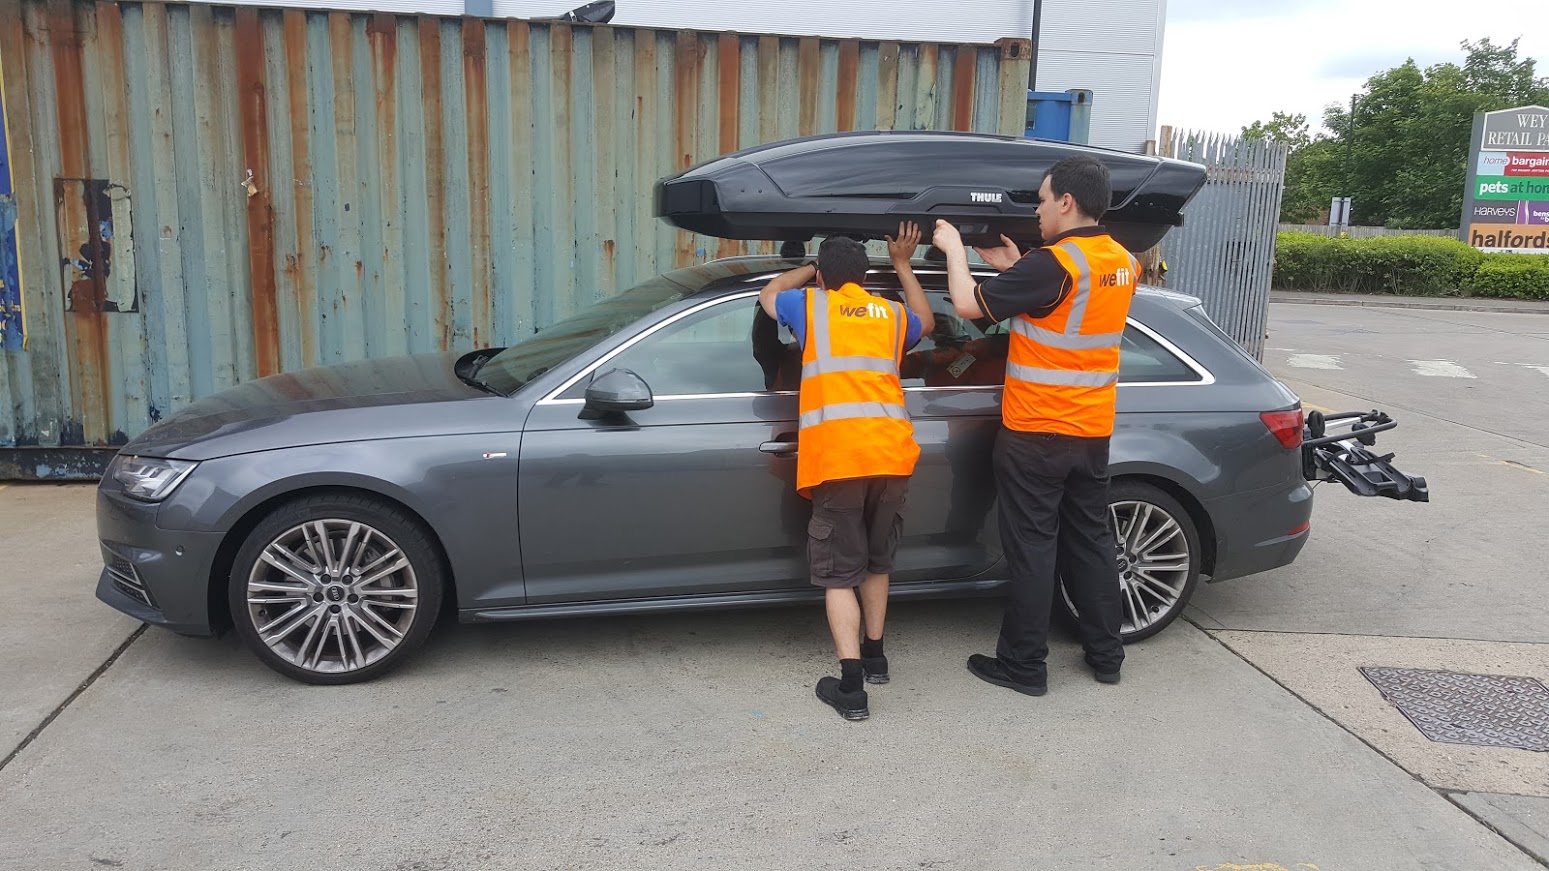 Halfords WeFit roof box fitting service review